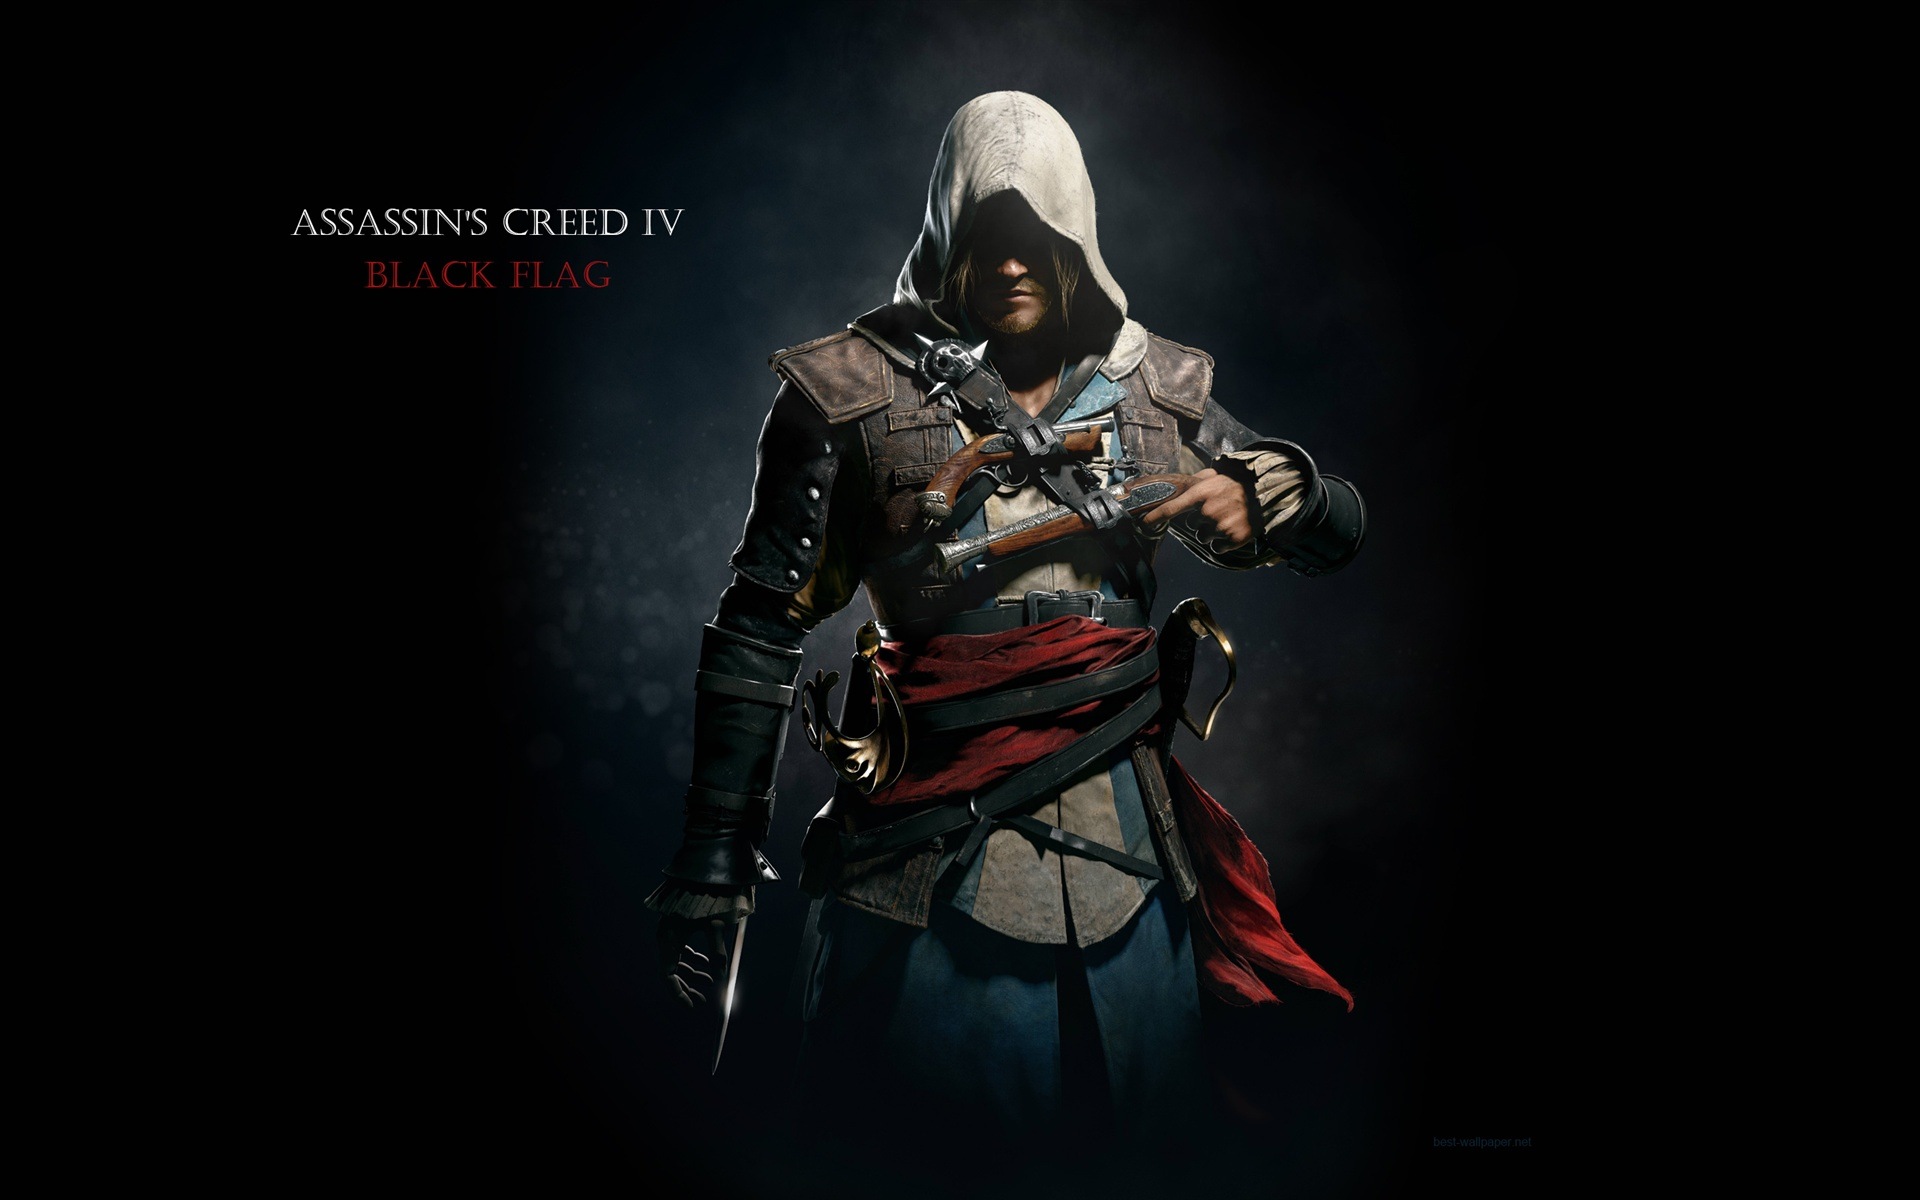 Assassin's Creed IV: Black Flag HD wallpapers #9 - 1920x1200